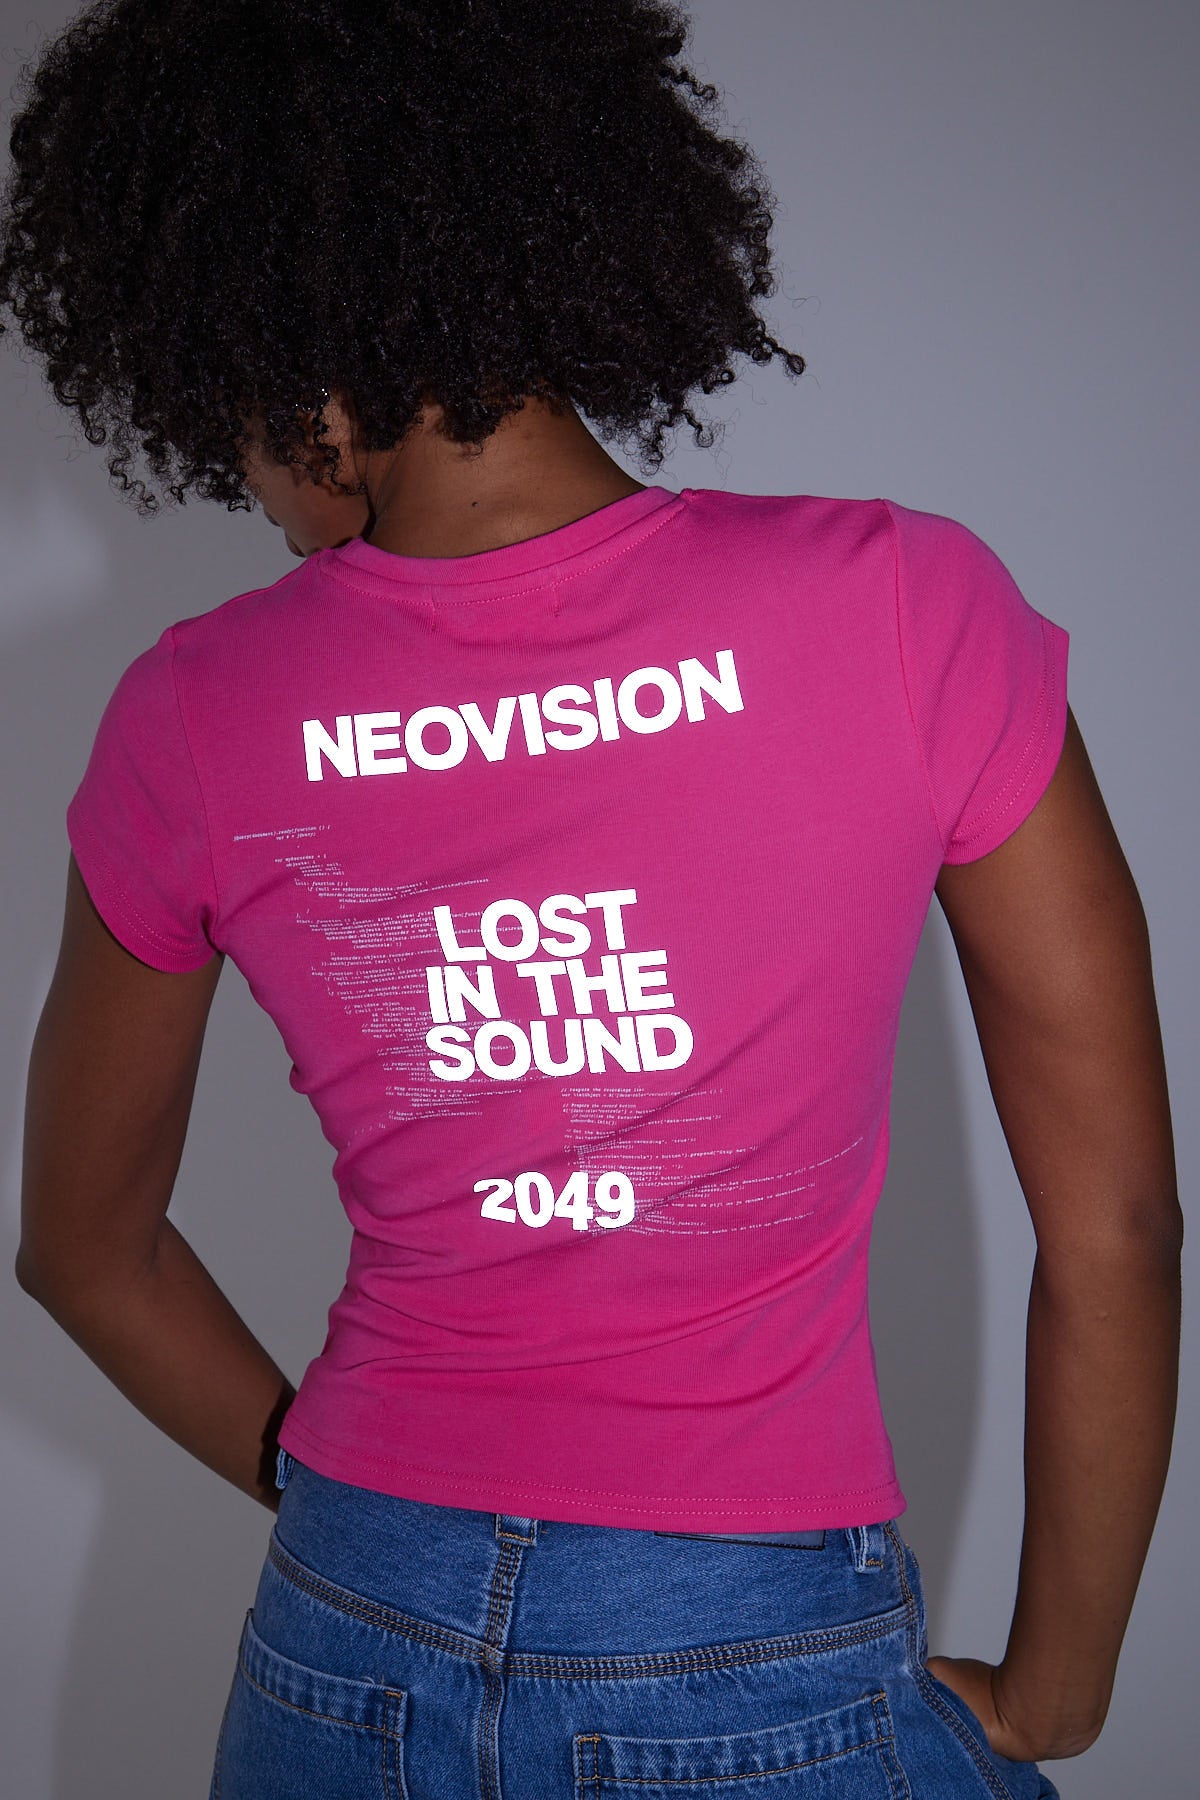 Neovision Lost In The Sound Baby Tee Pink